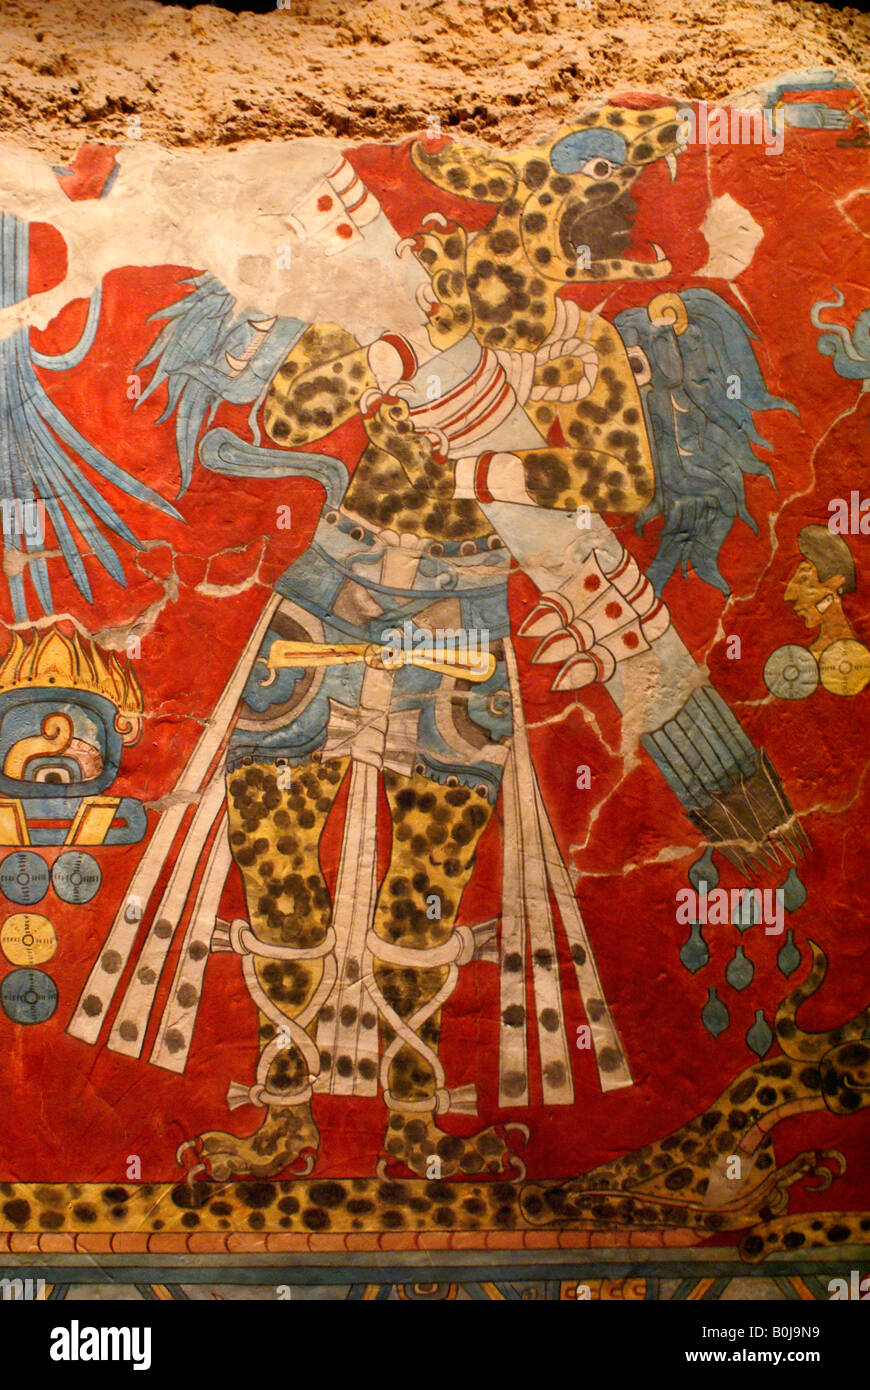 Copy of mural of warrior wearing jaguar skins from Cacaxtla, Tlaxcala state, National Museum of Anthropology, Mexico City Stock Photo